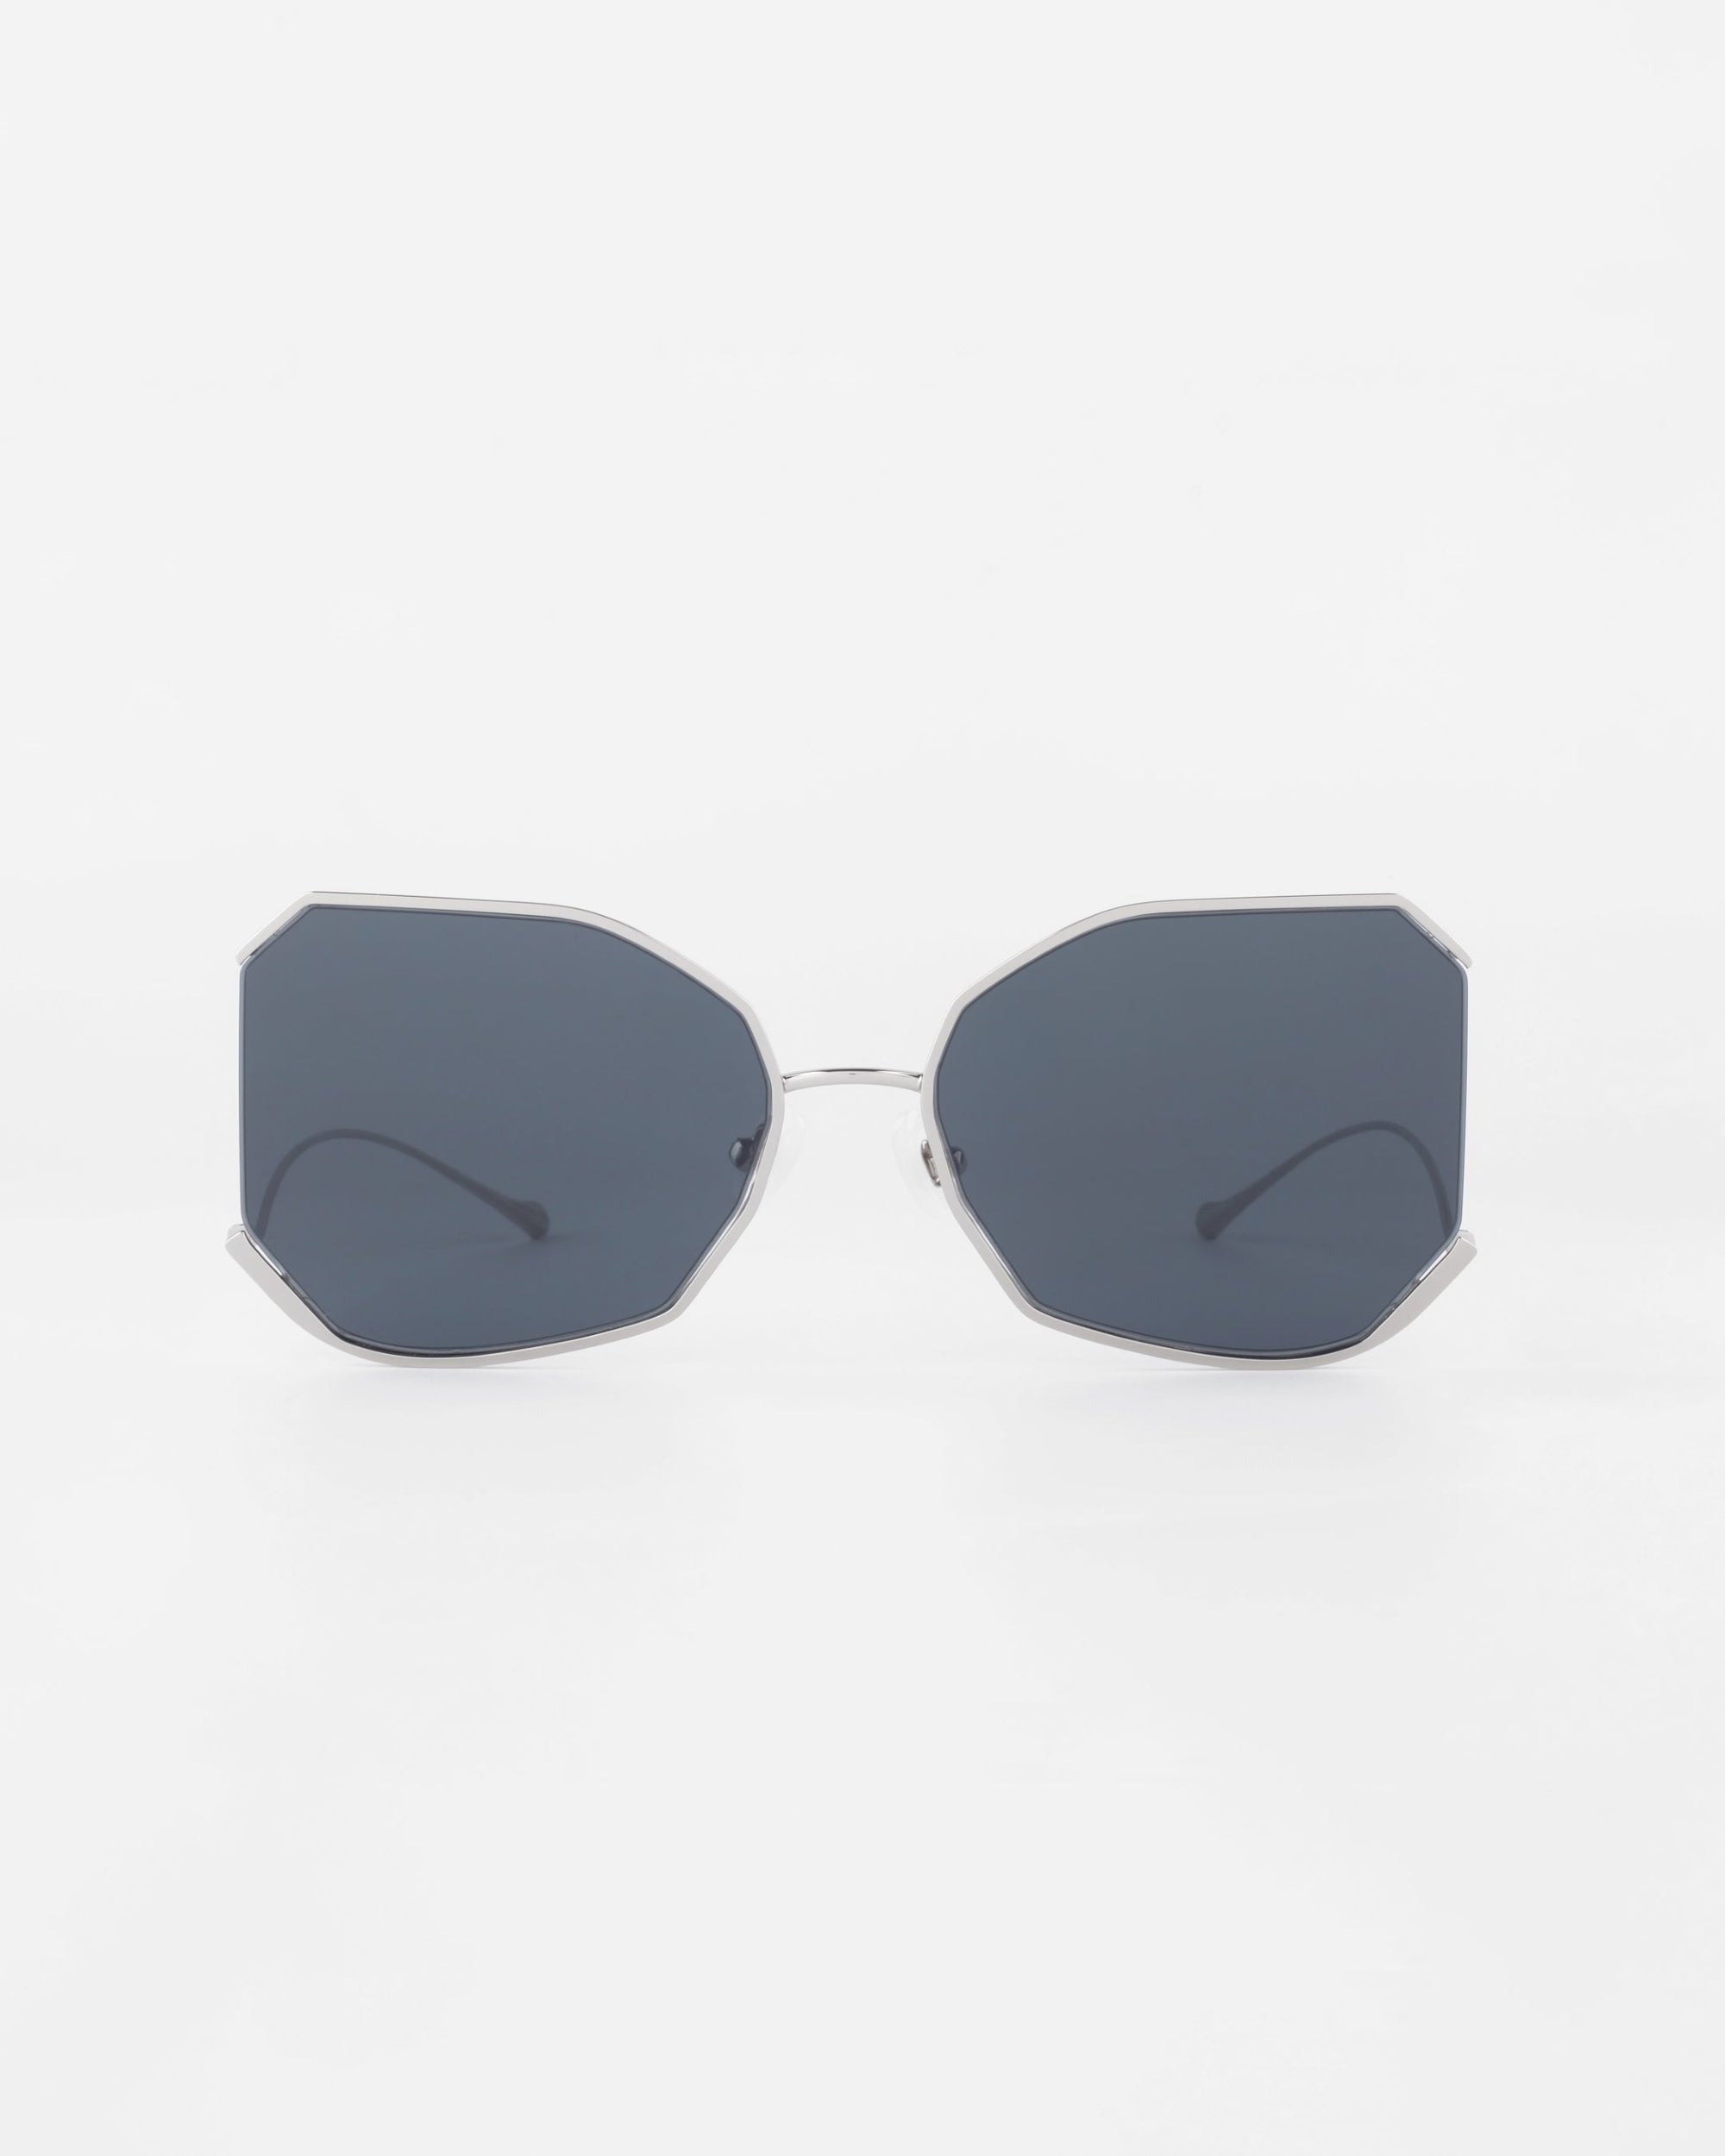 A pair of sunglasses with hexagonal-shaped, dark lenses and a thin, gold-plated stainless steel frame. The lightweight Nylon lenses offer UVA & UVB protection. The background is white, and the "Painter" by For Art's Sake® sunglasses are centered in the image.